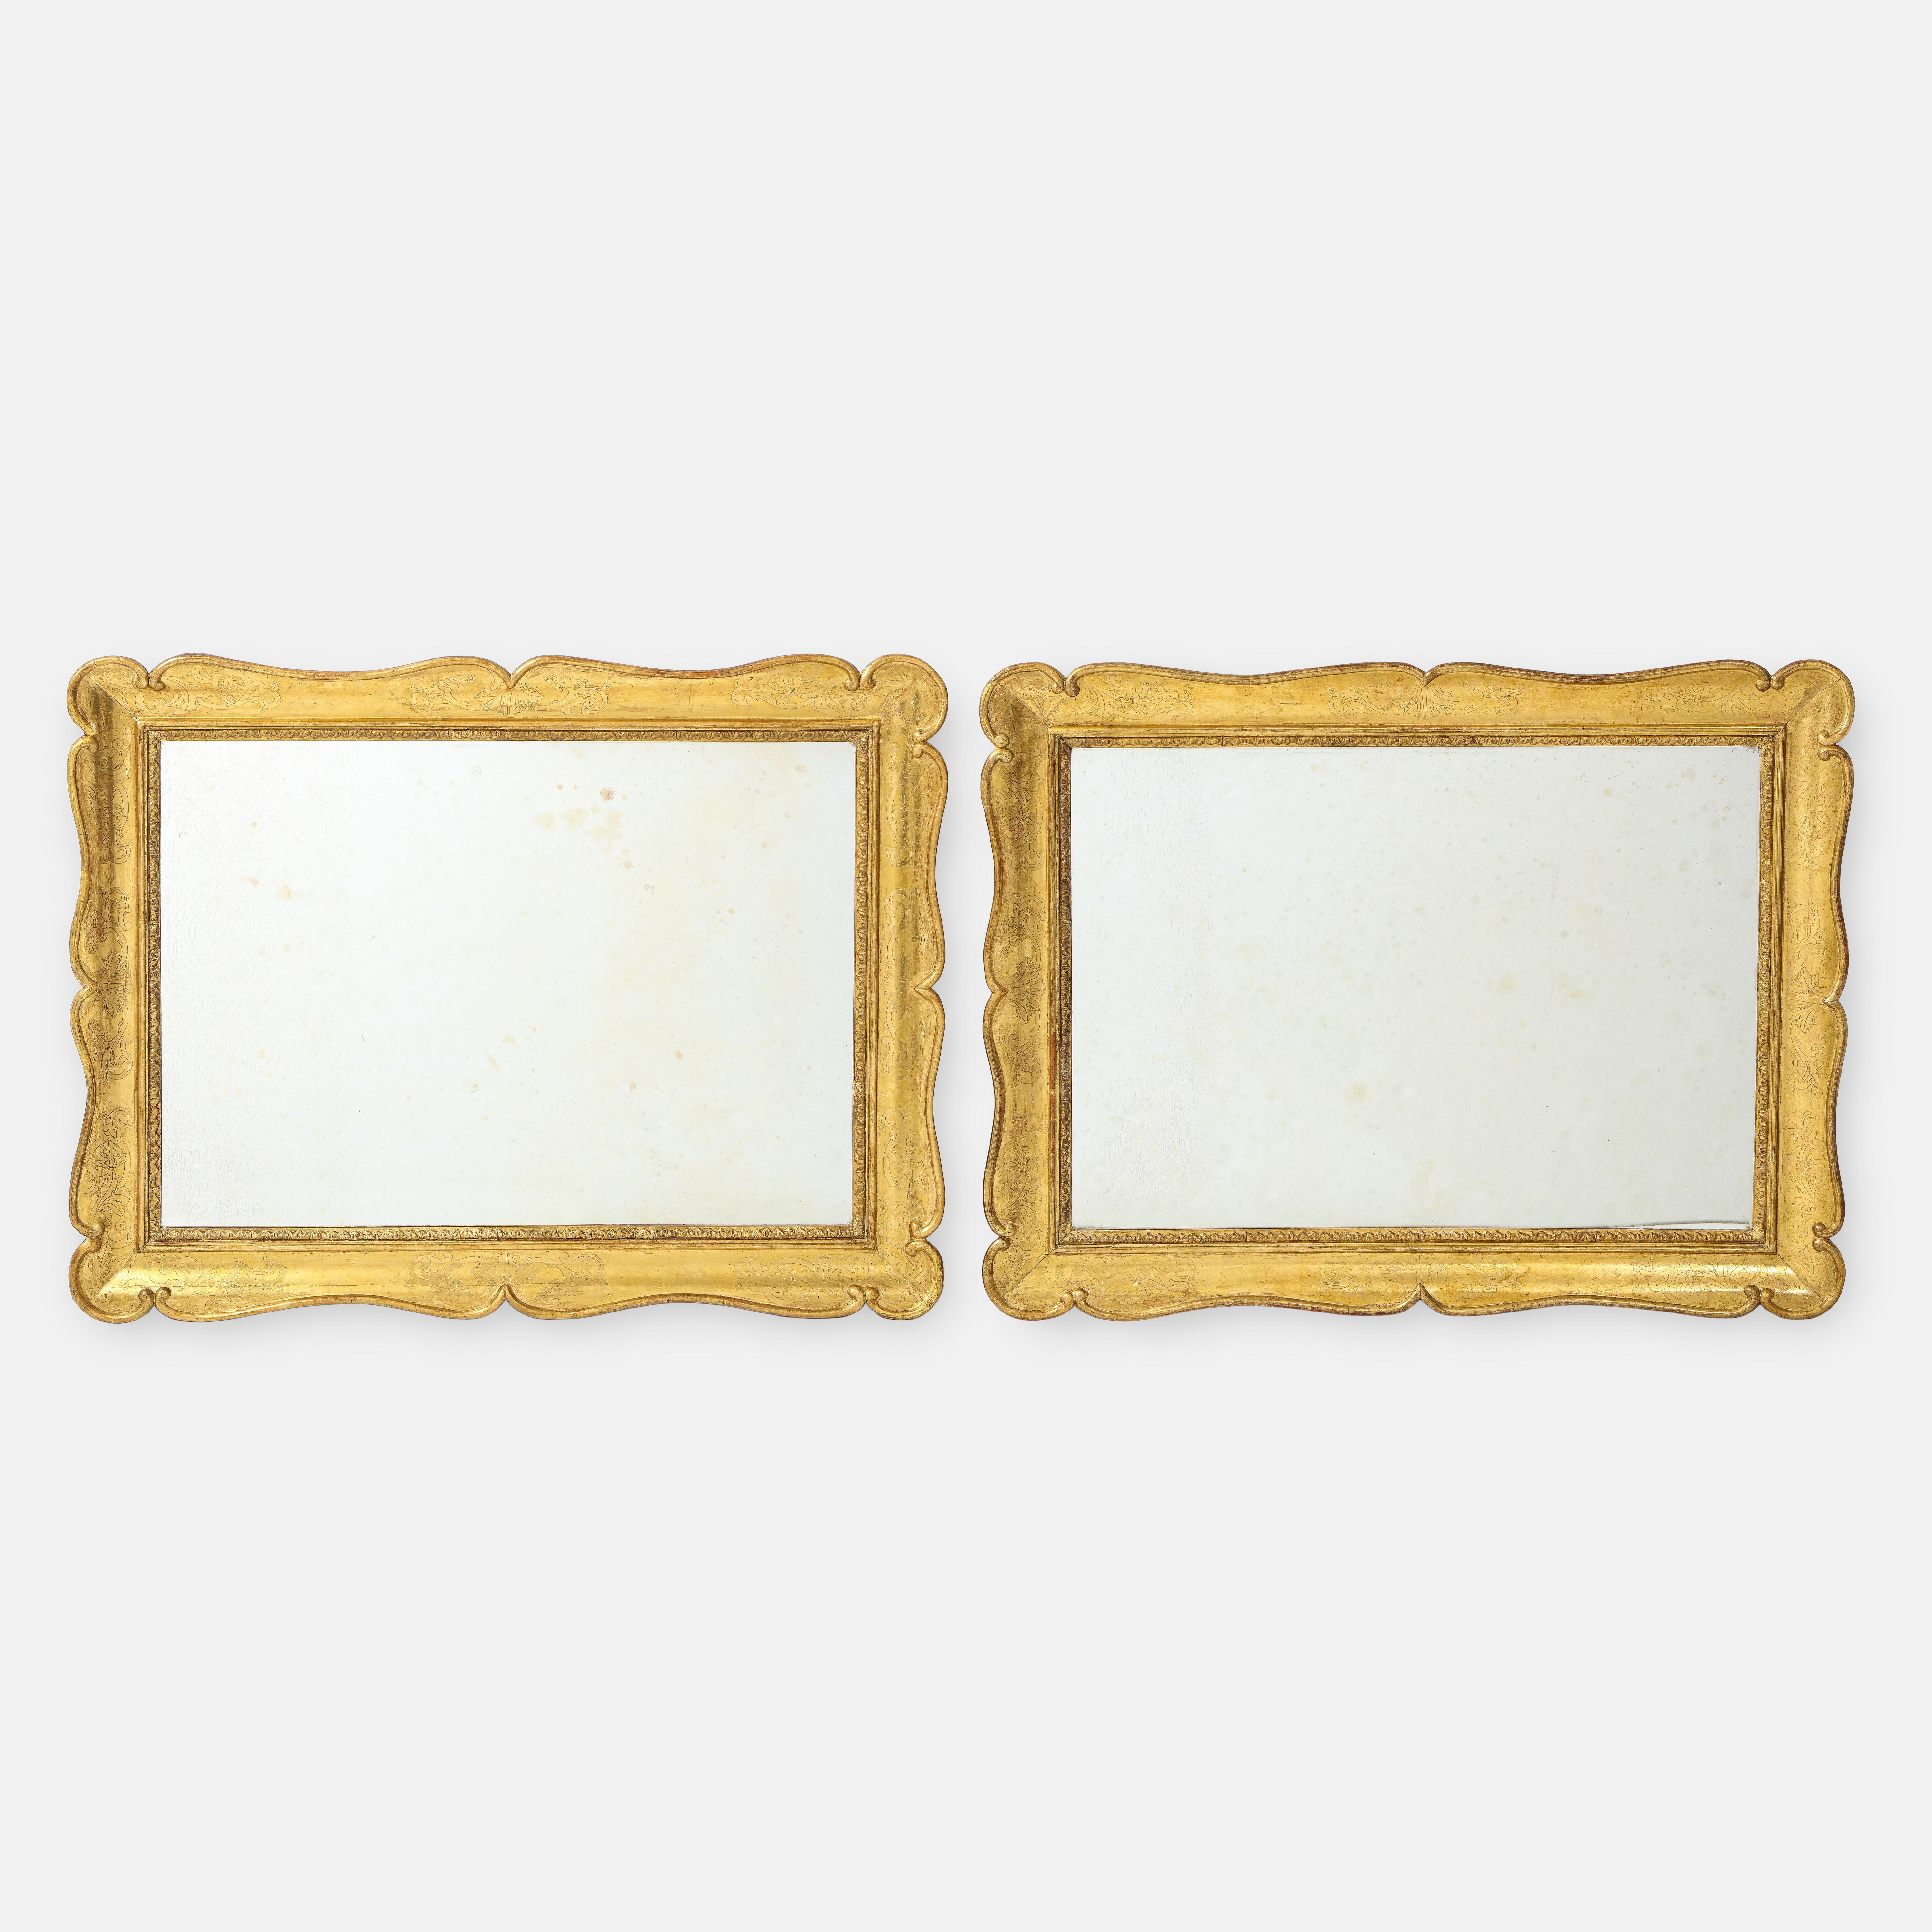 Pair of 19th Century Italian Carved Giltwood Mirrors For Sale 6